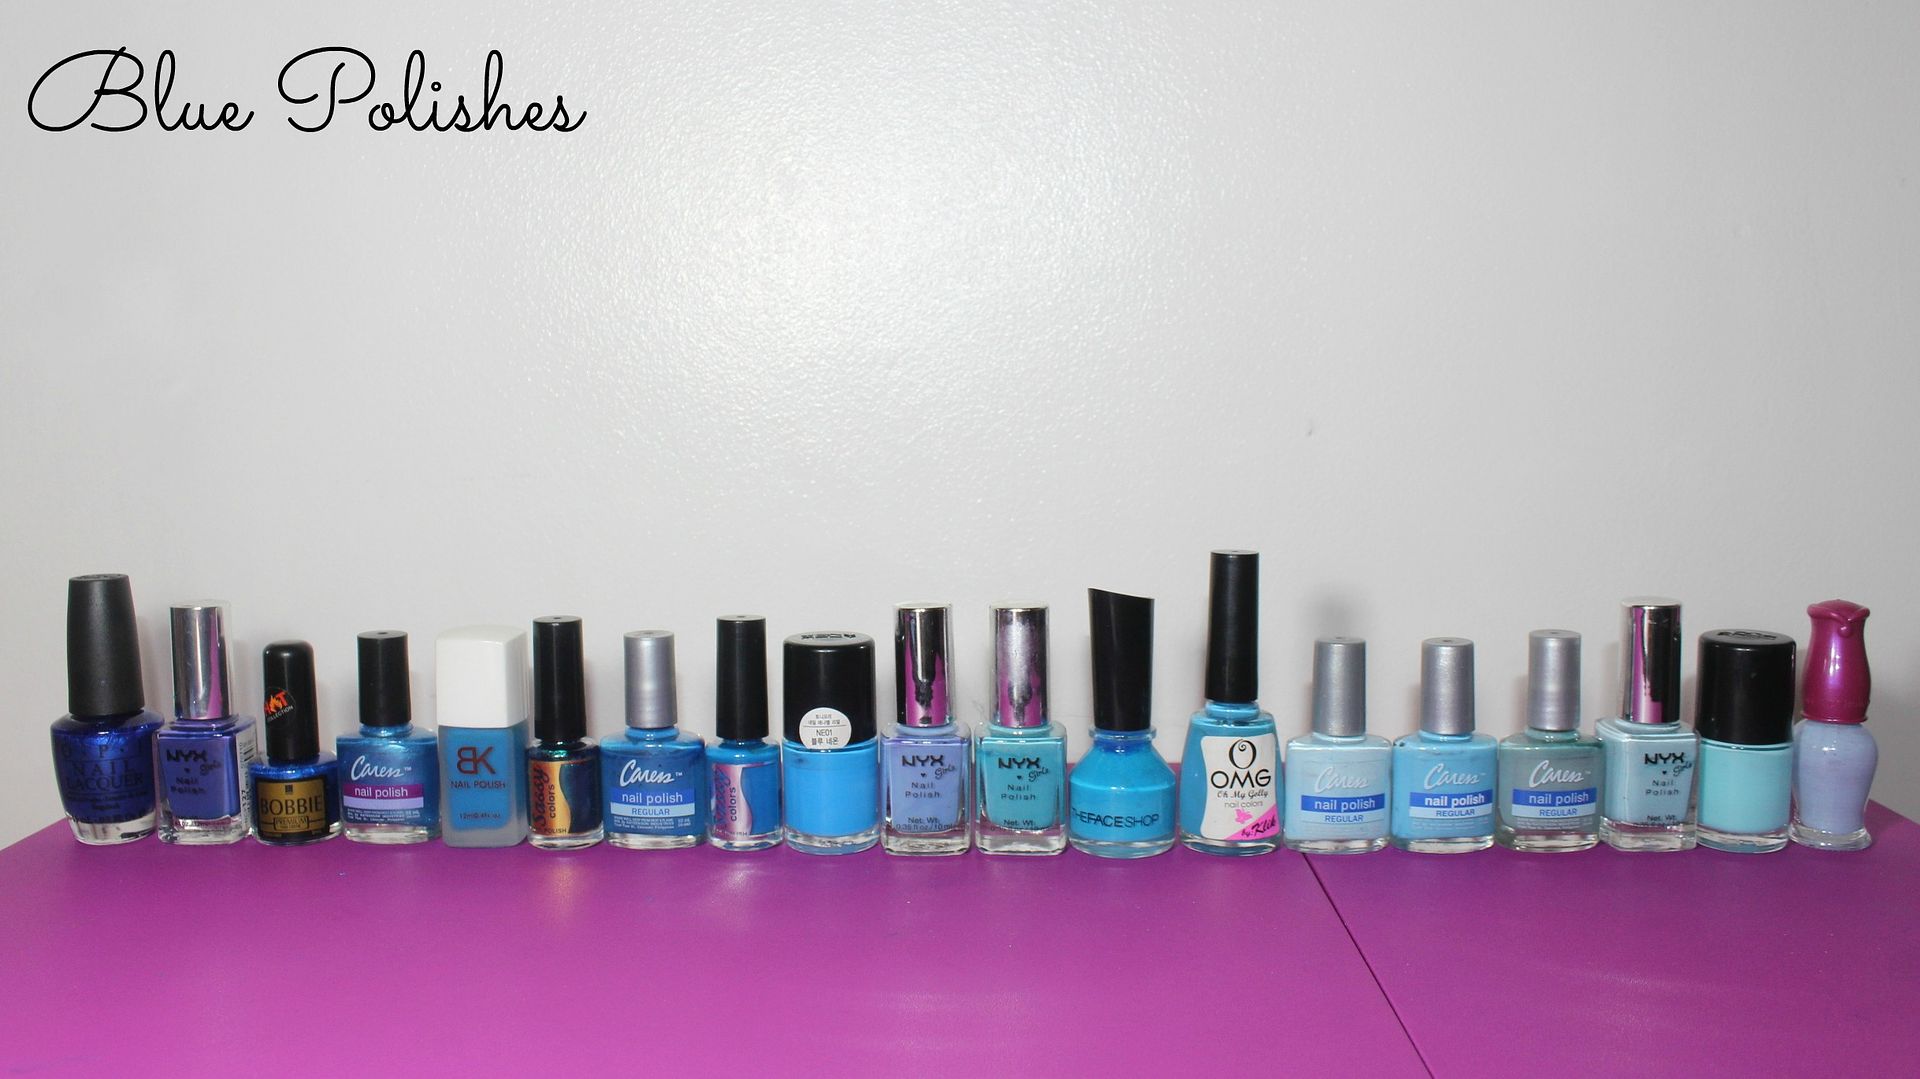 2. "Must-Try Asian Nail Polish Shades for a Pop of Color" - wide 3